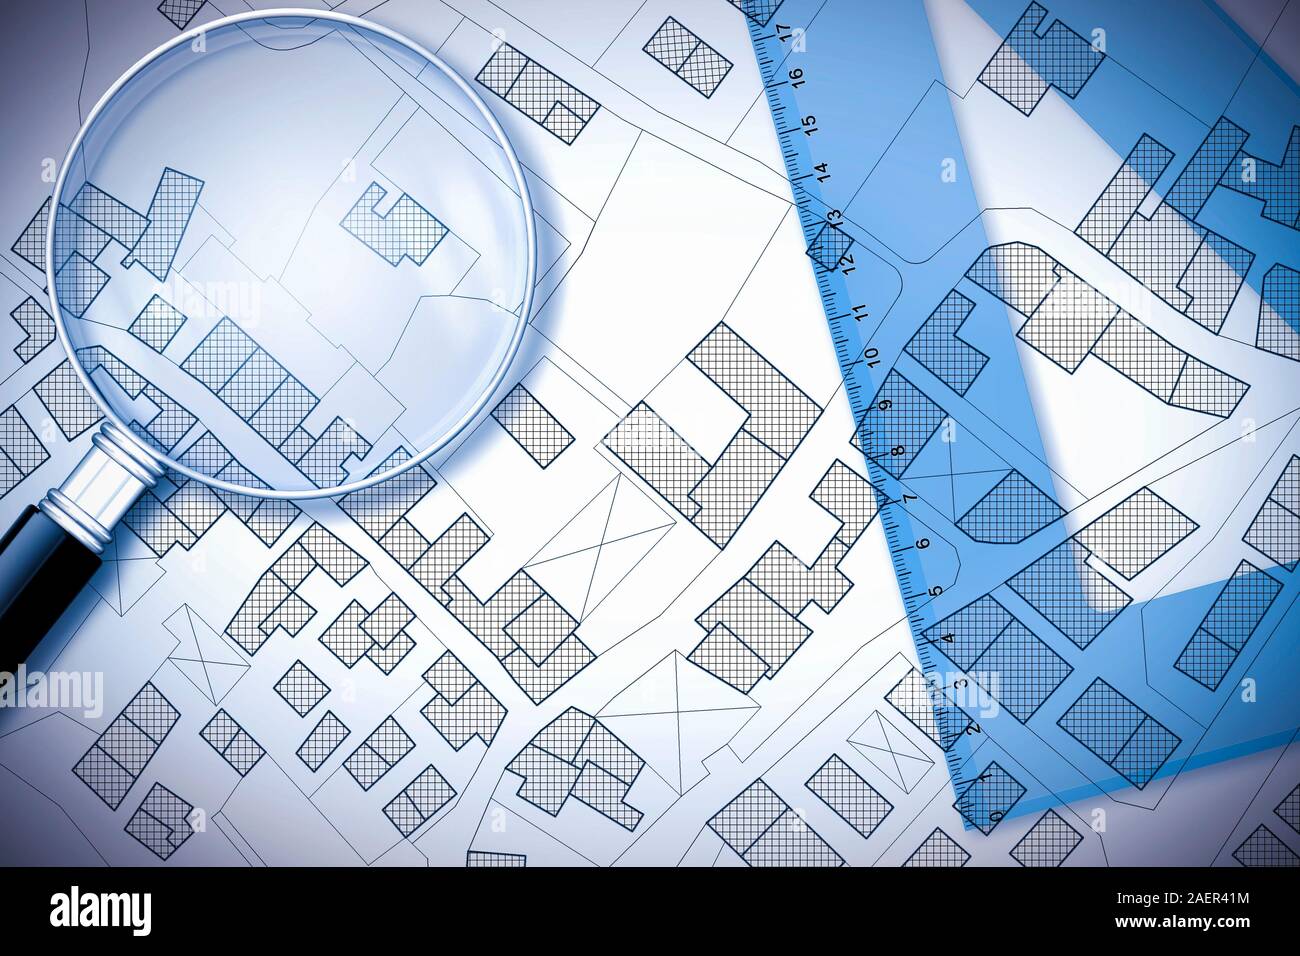 Plastic set square and magnifying glass over an imaginary cadastral map of territory with buildings, fields and roads - 3D render concept image with c Stock Photo